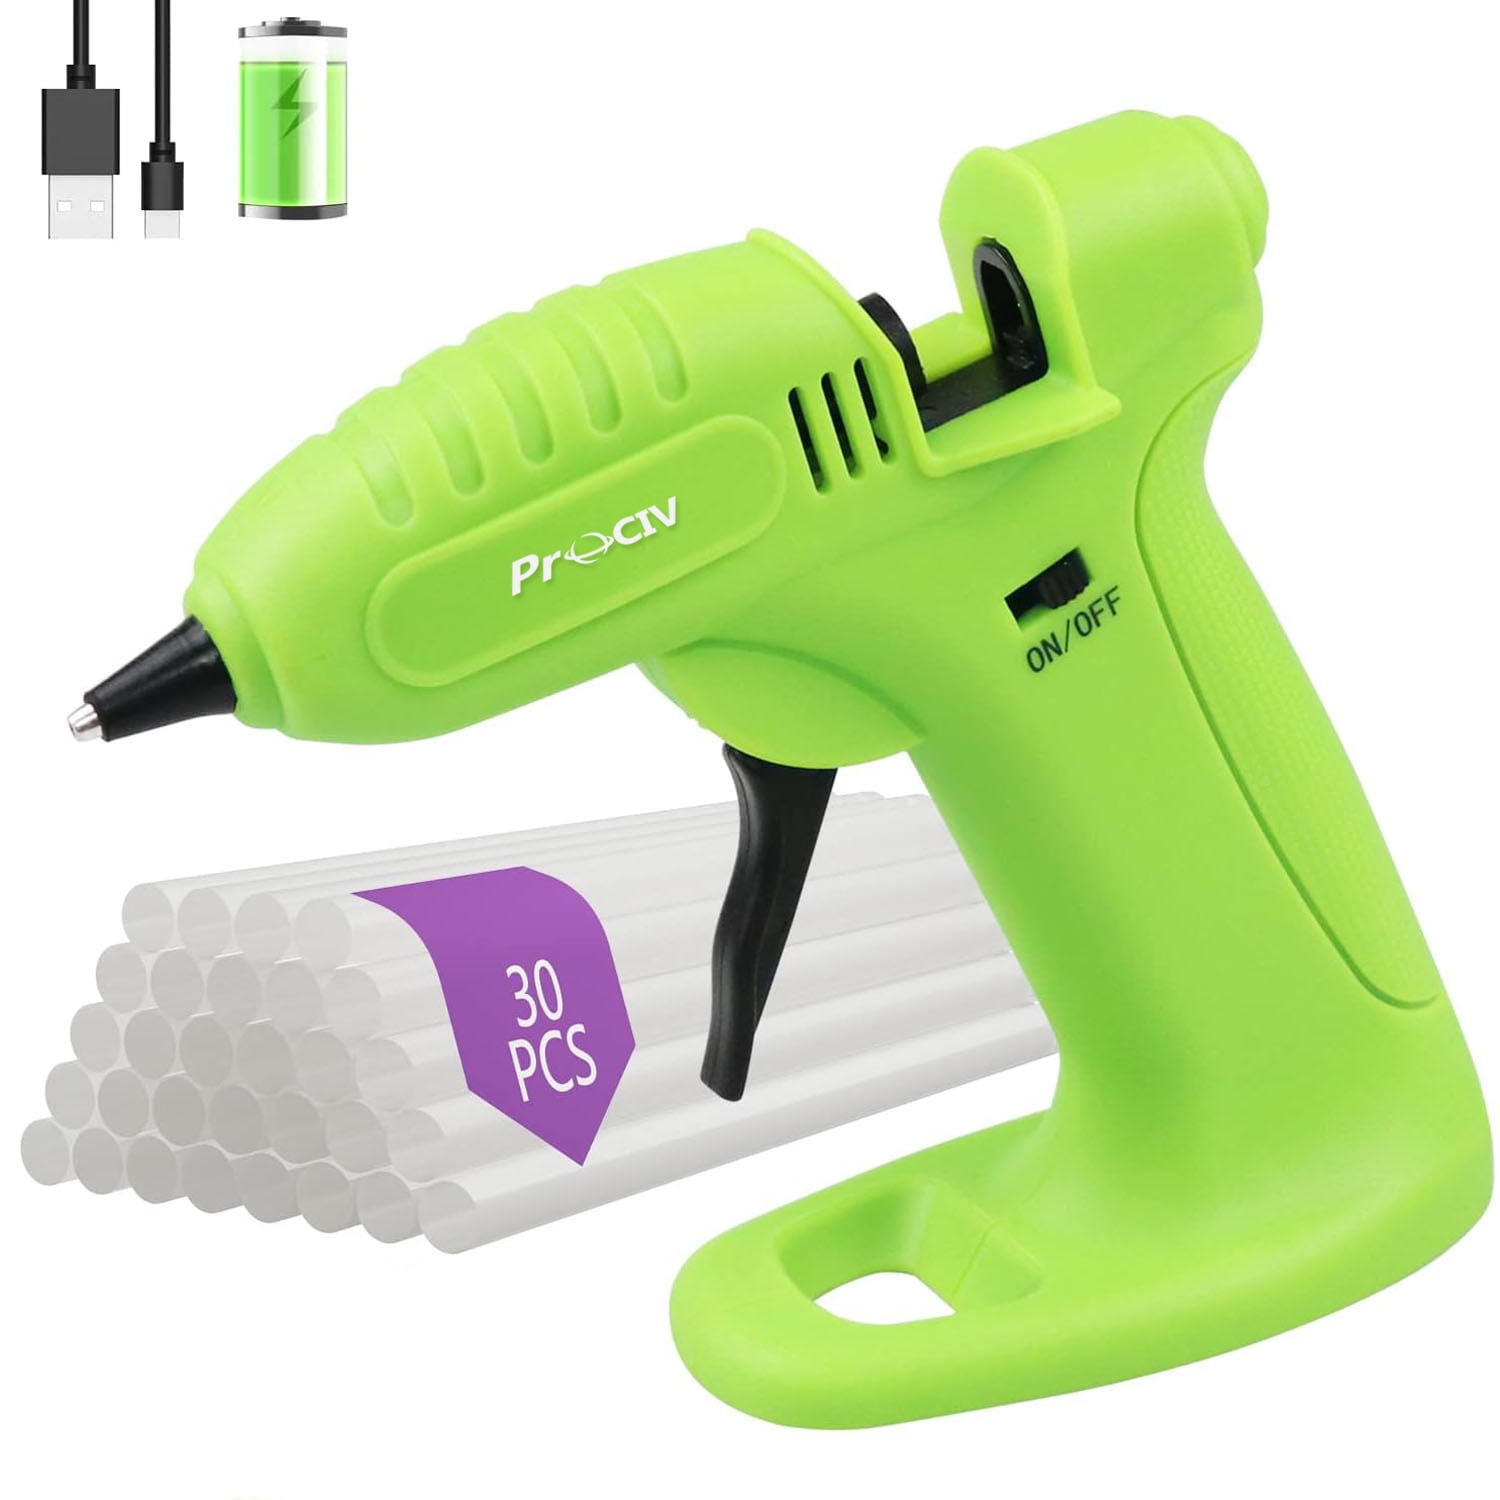 Cordless Hot Glue Gun, 2900 mAh Wireless USB Chargeable Battery Charged  with 30 Glue Sticks For Craft, DIY, Art, Gift - AliExpress